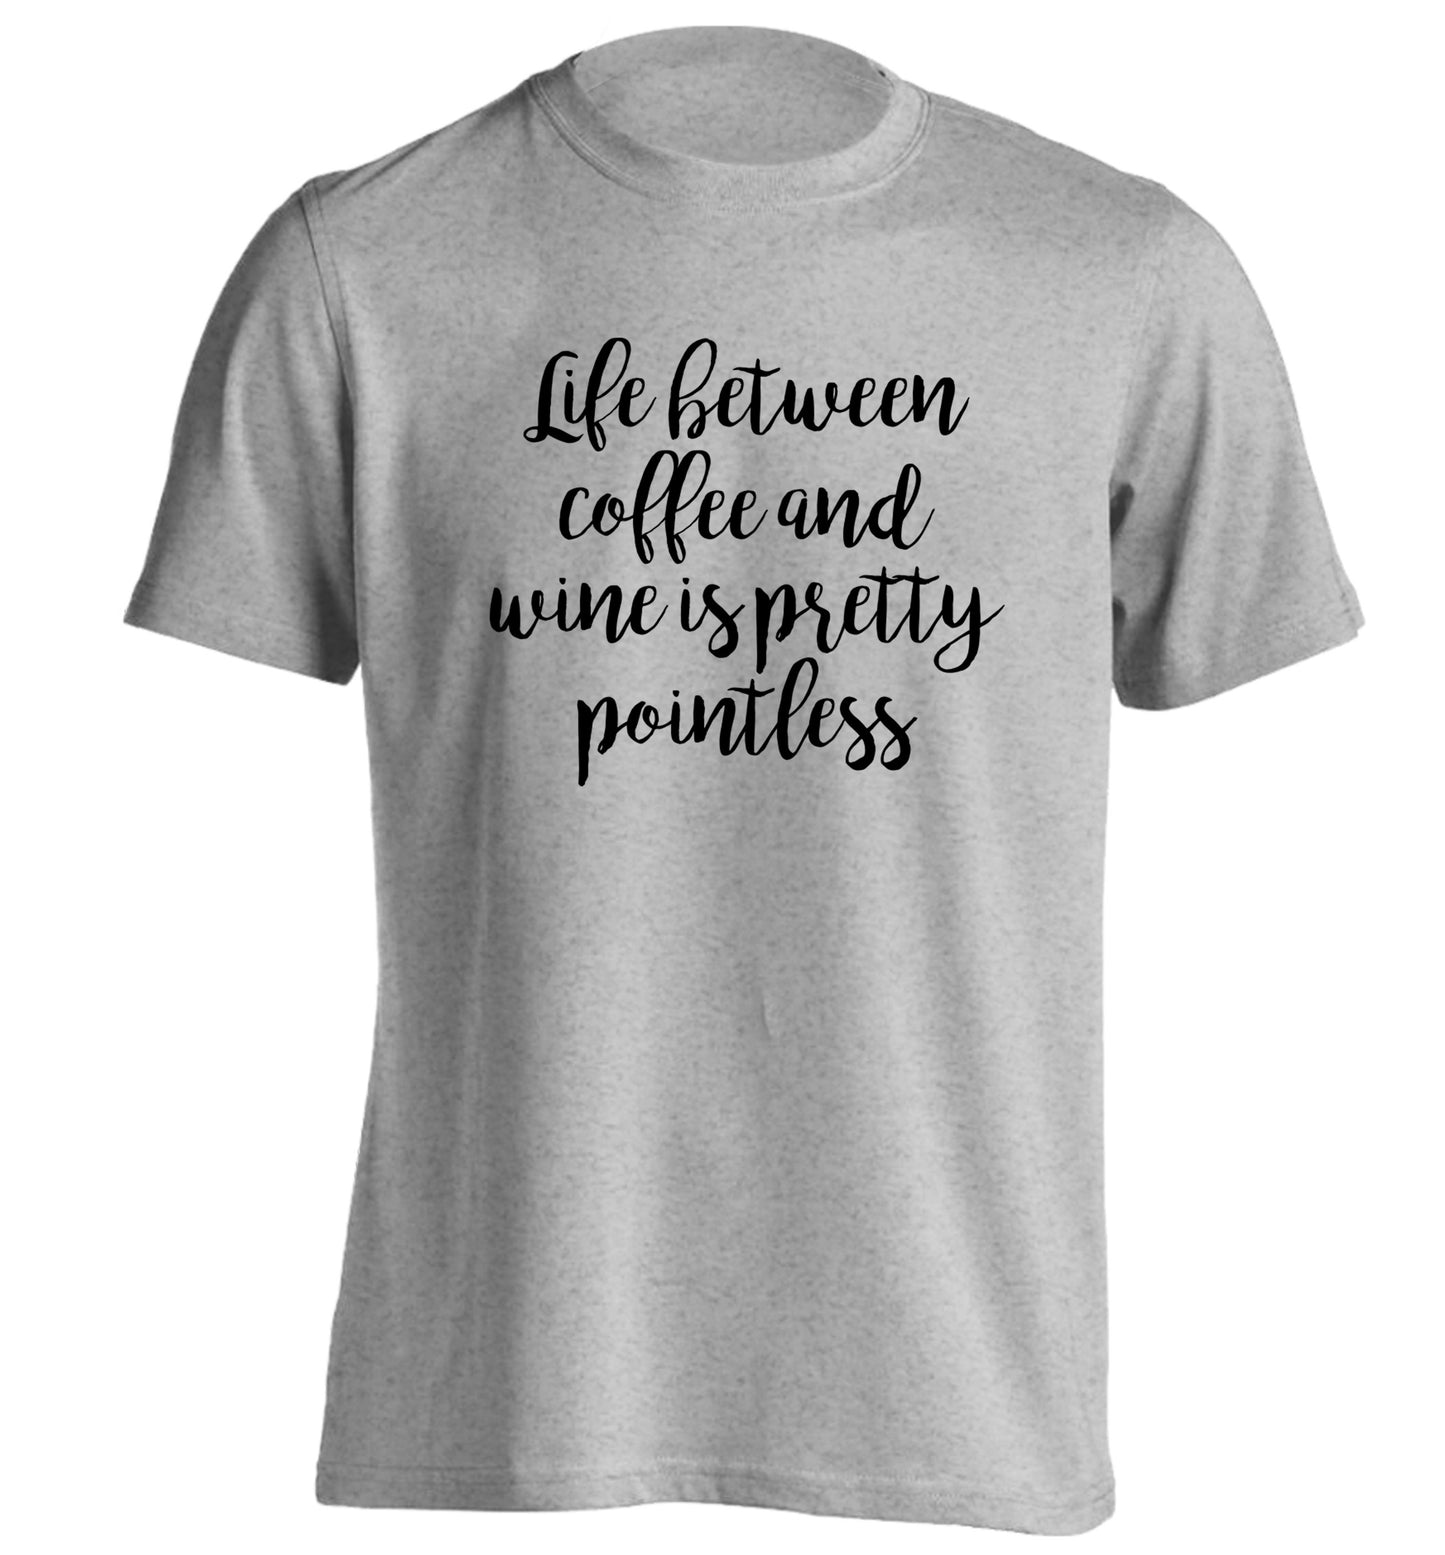 Life between coffee and wine is pretty pointless adults unisex grey Tshirt 2XL